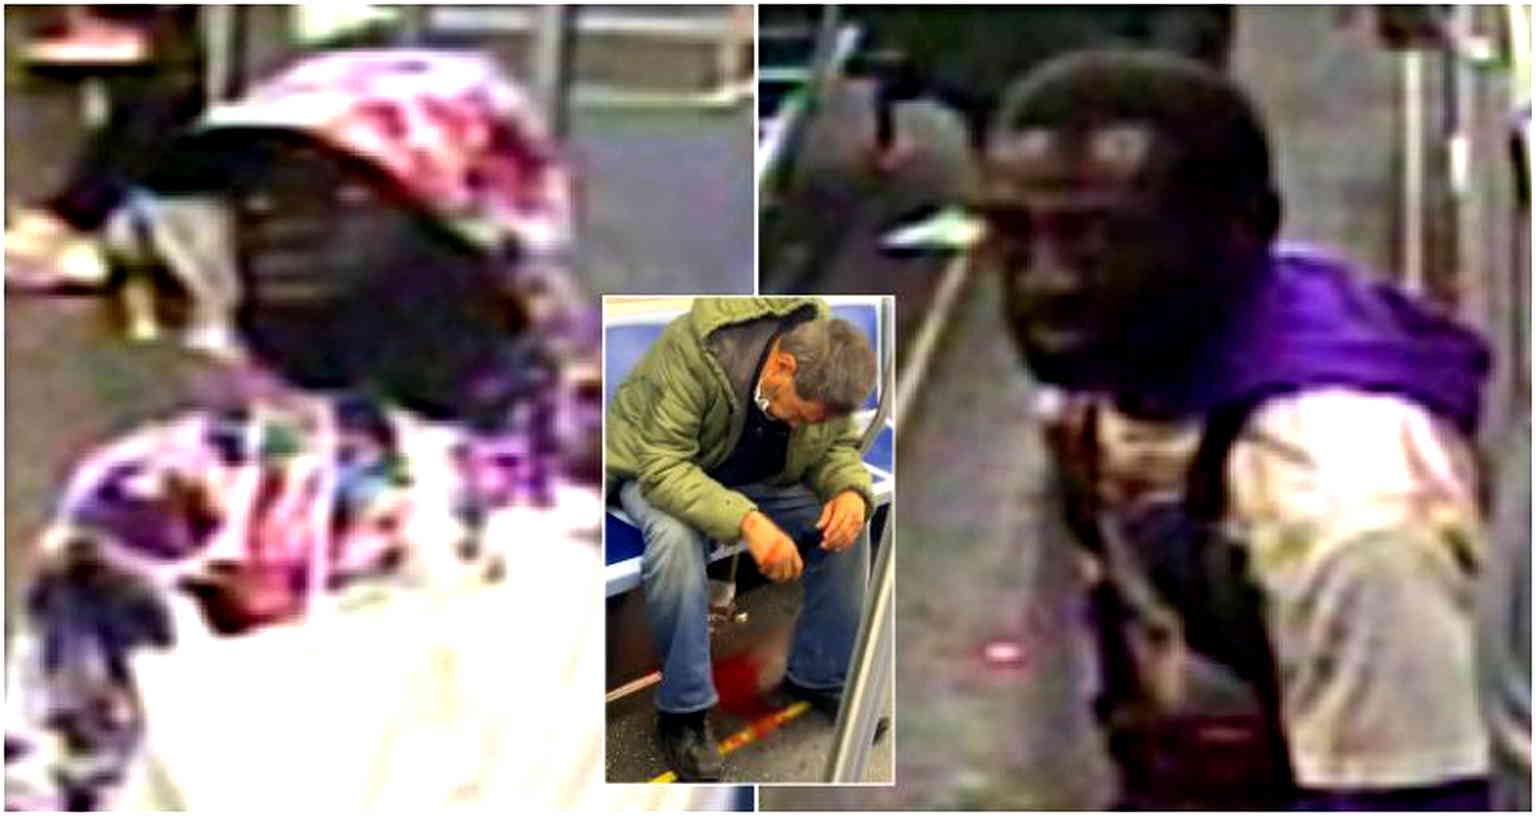 Chicago police release details of suspects in violent robbery of elderly Asian man on Red Line train